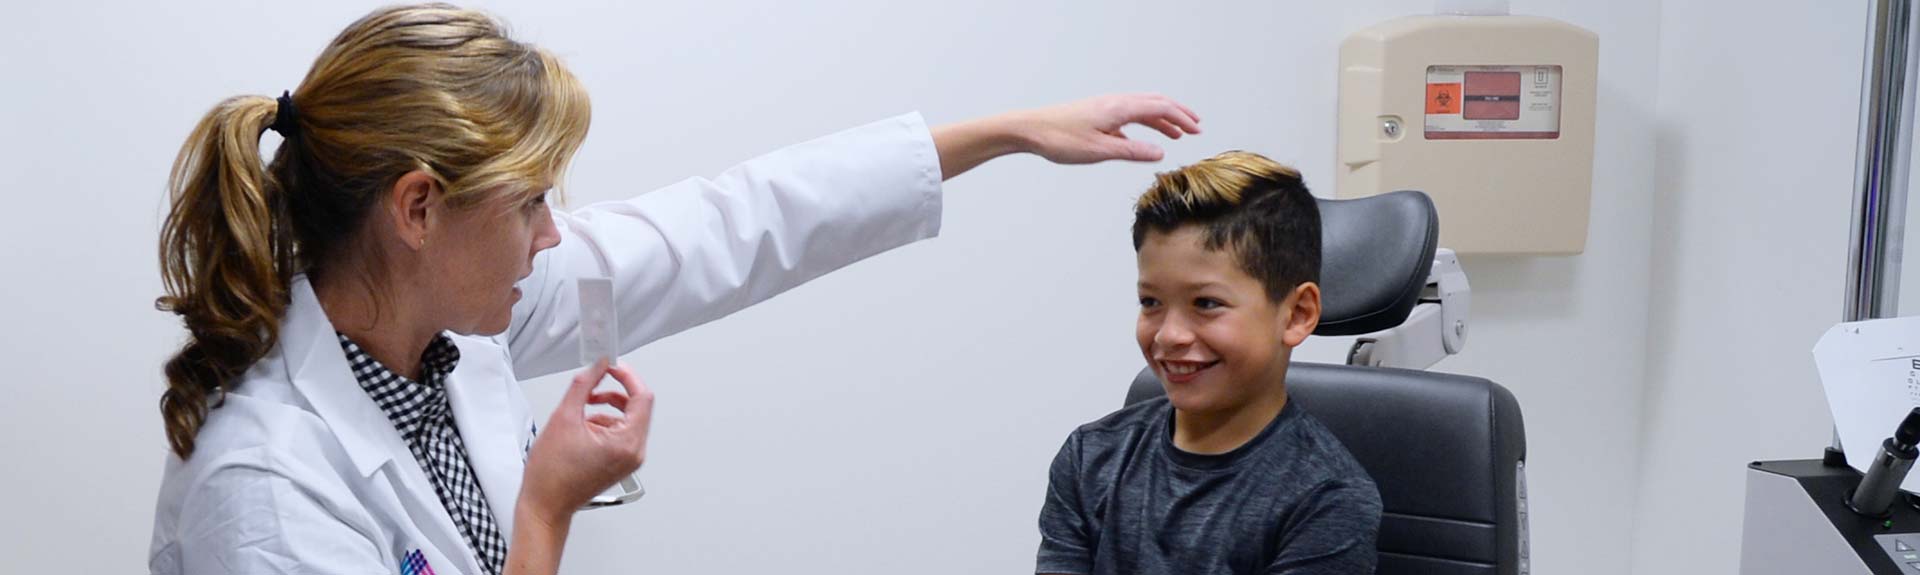 Image of doctor examining young boy